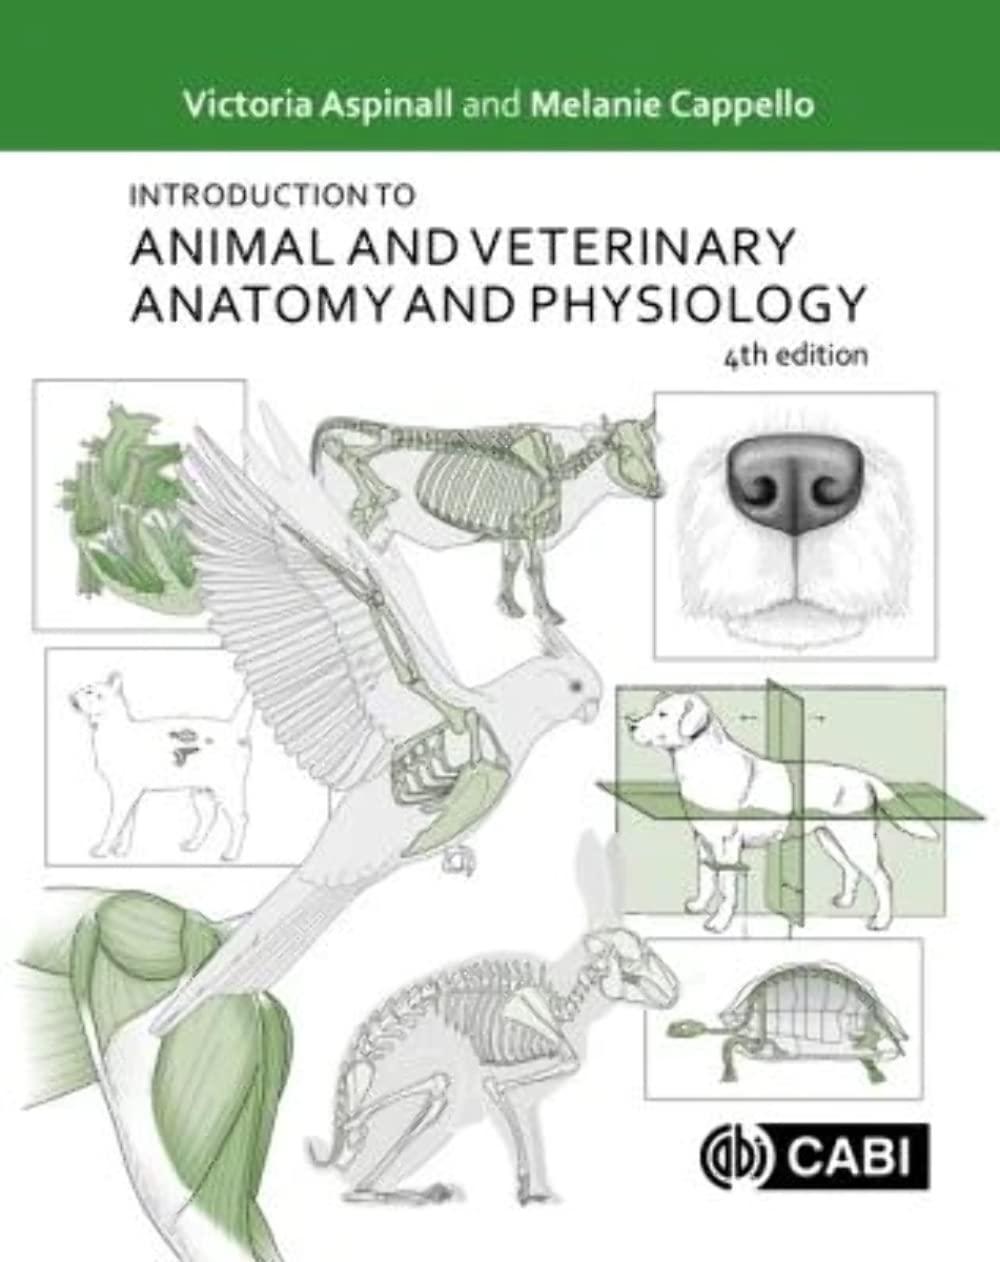 introduction to animal and veterinary anatomy and physiology 4th edition victoria aspinall, melanie cappello